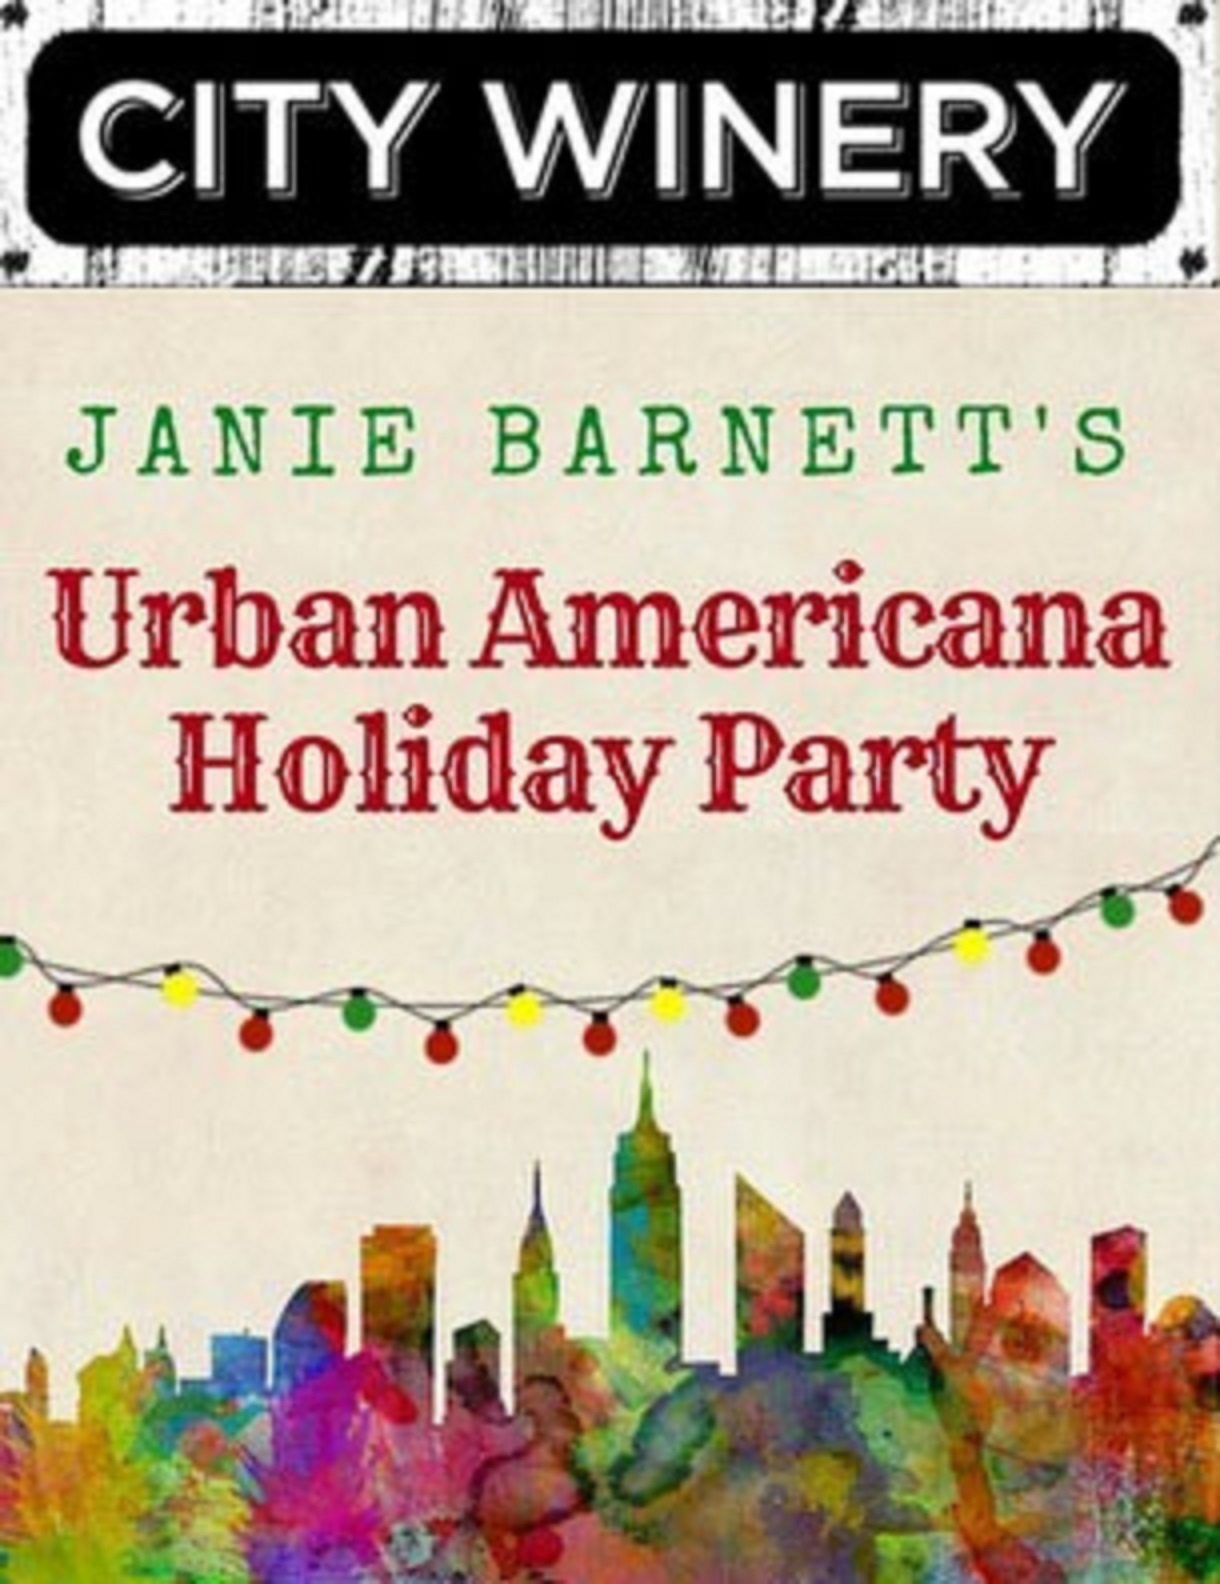 JANIE BARNETT TO PRESENT THE FIRST ANNUAL URBAN AMERICANA HOLIDAY PARTY  AT  CITY WINERY